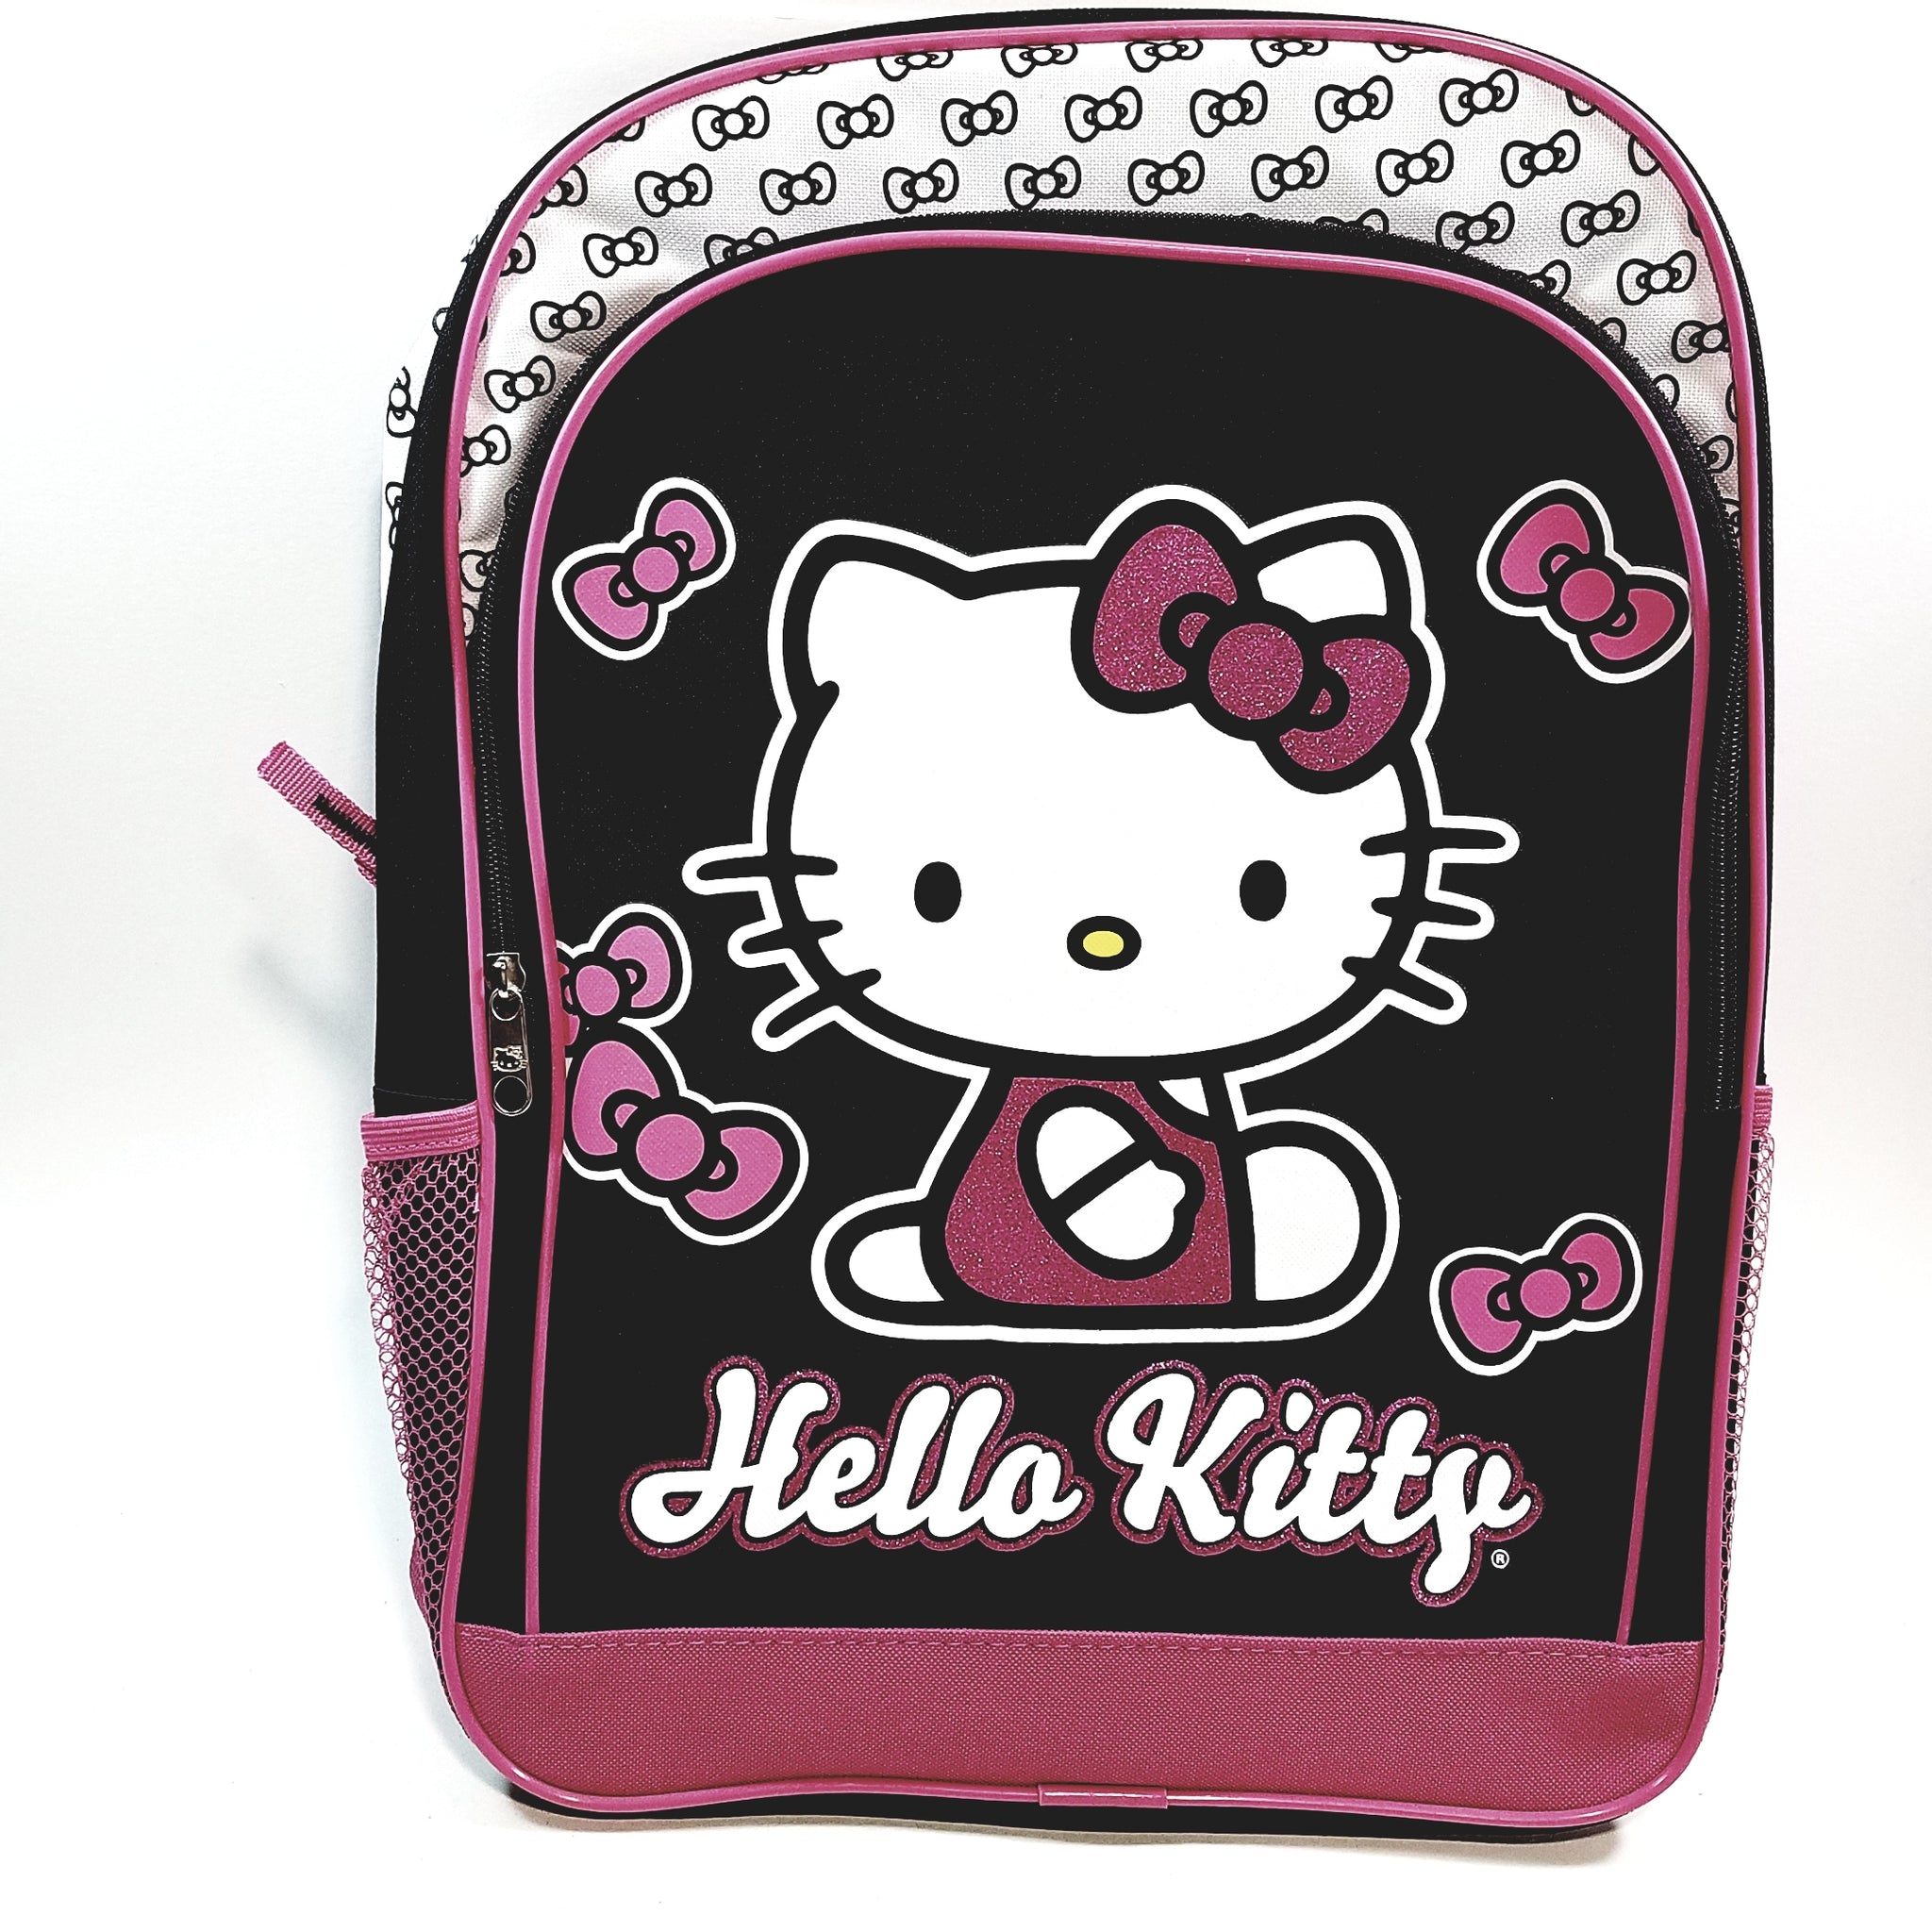 Hello Kitty Large Kids School Backpack With Mesh Pockets